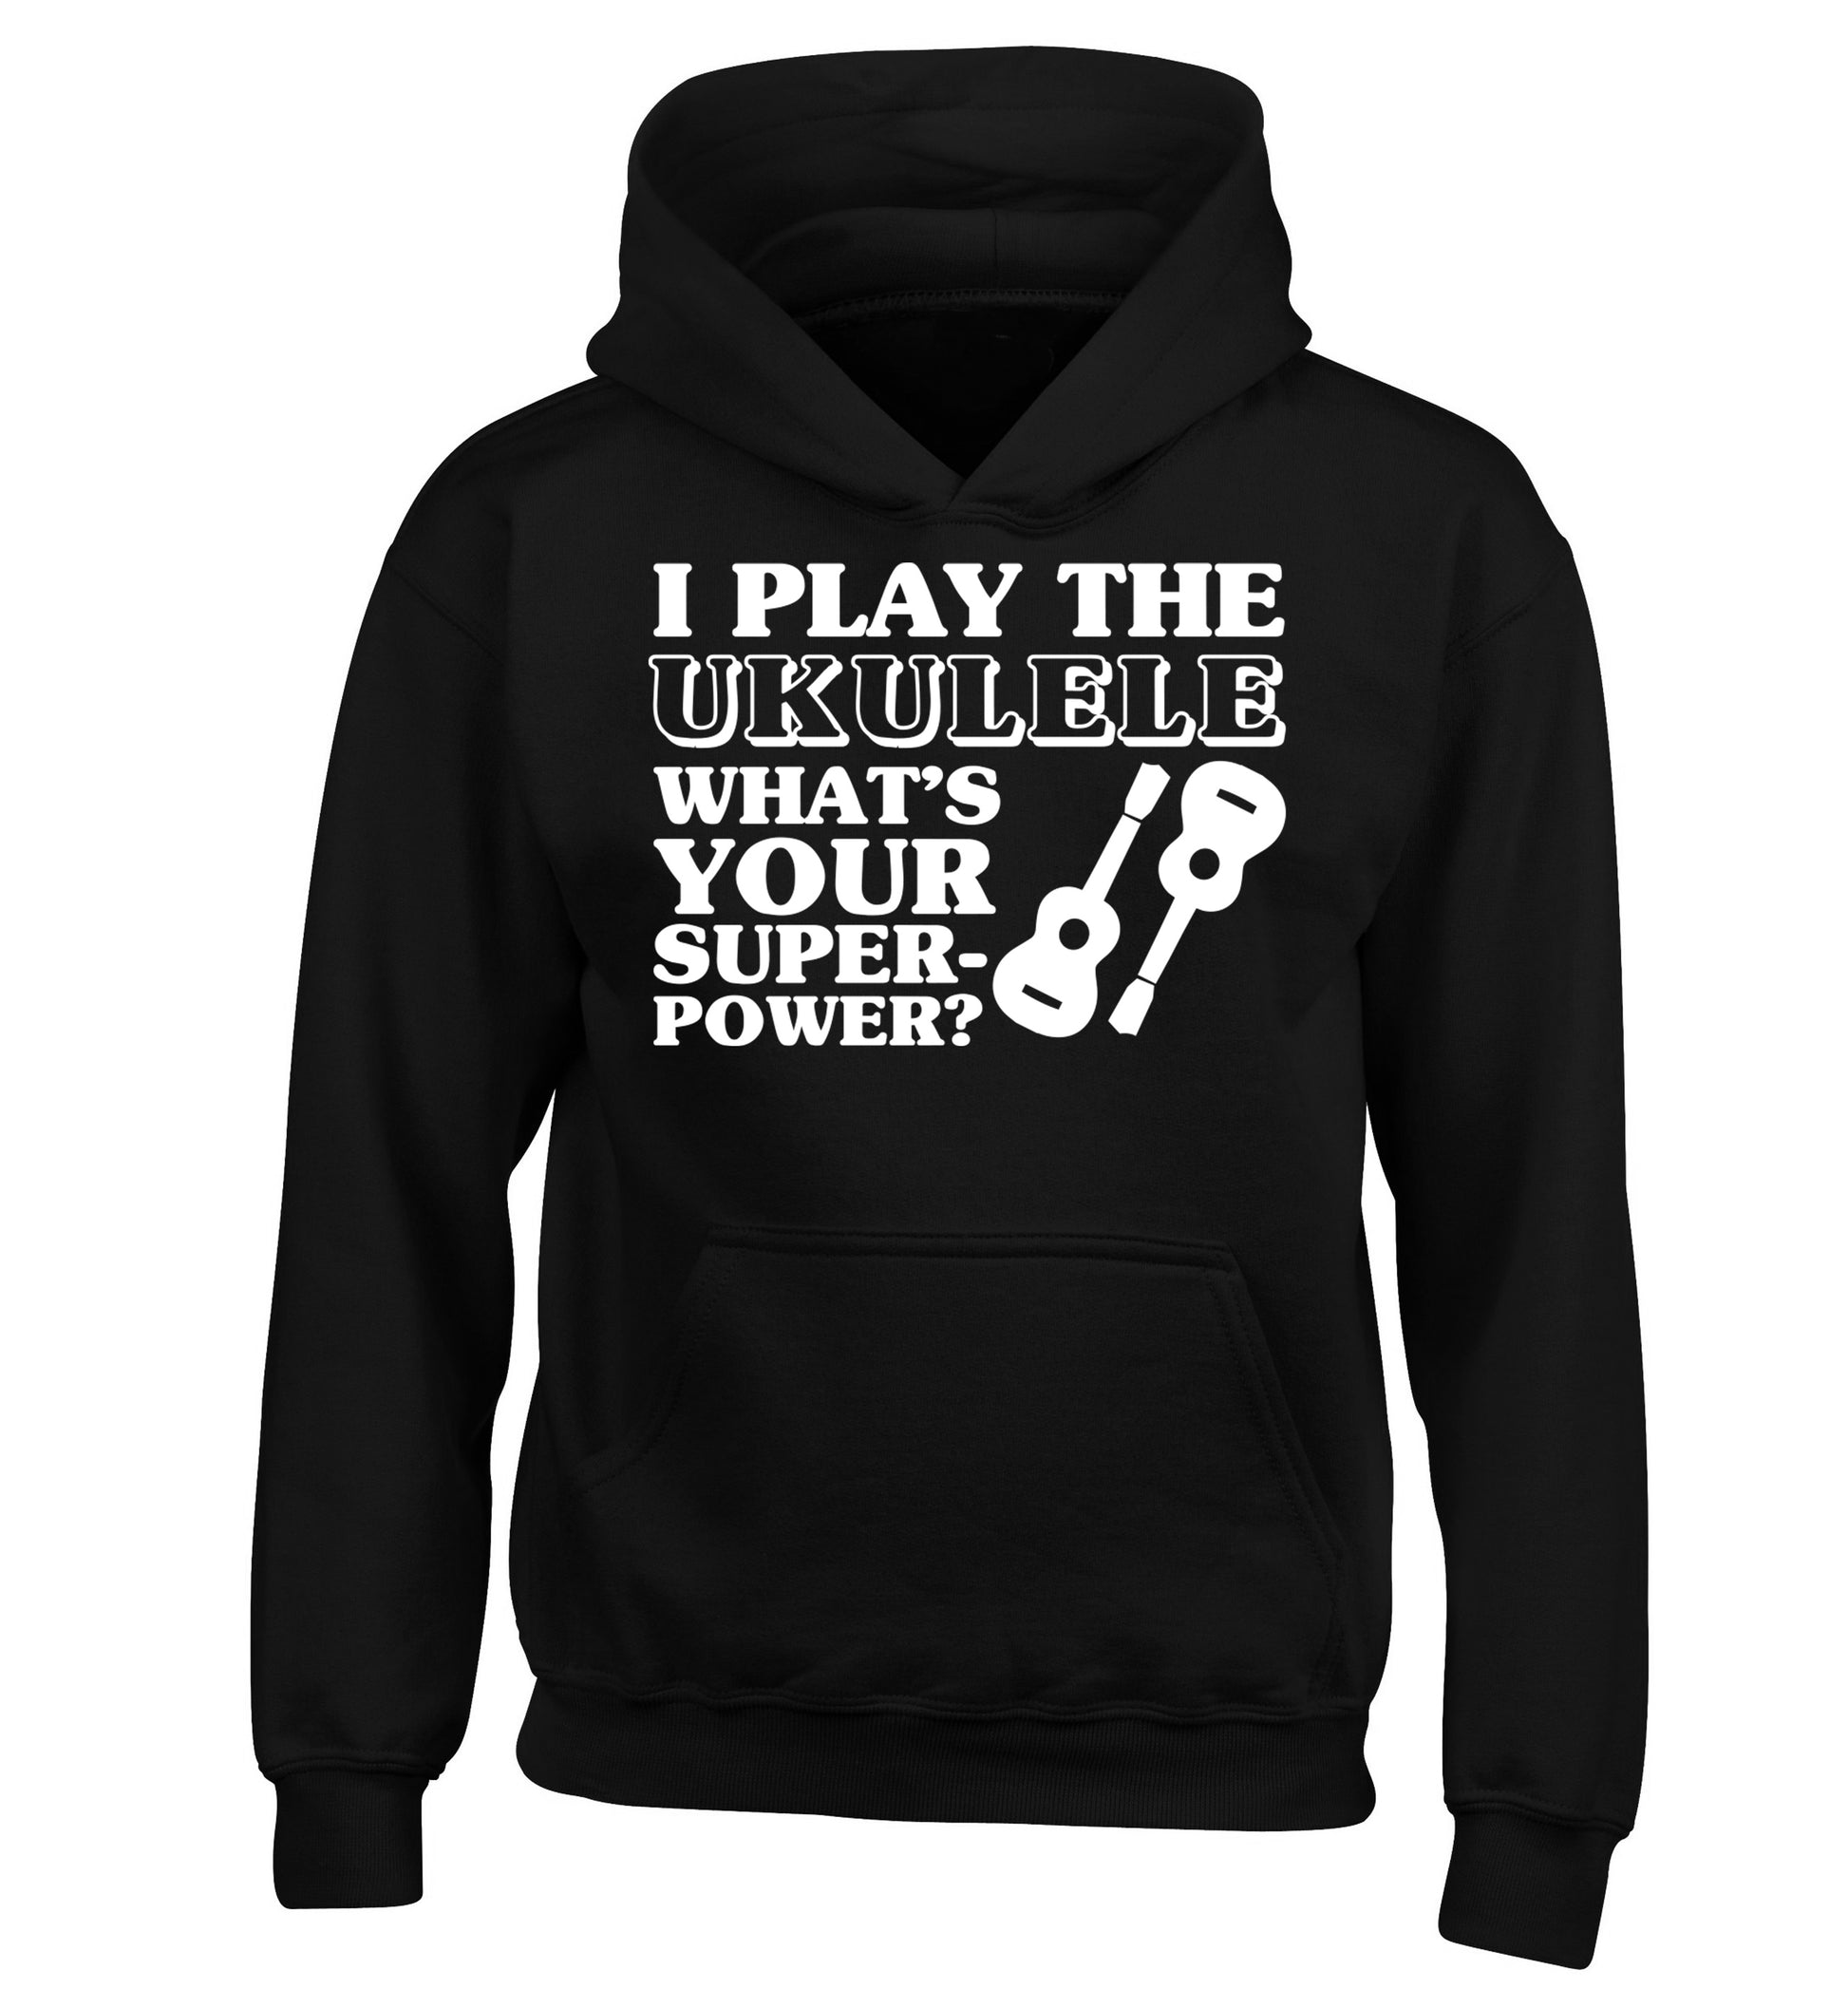 I play the ukulele what's your superpower? children's black hoodie 12-14 Years